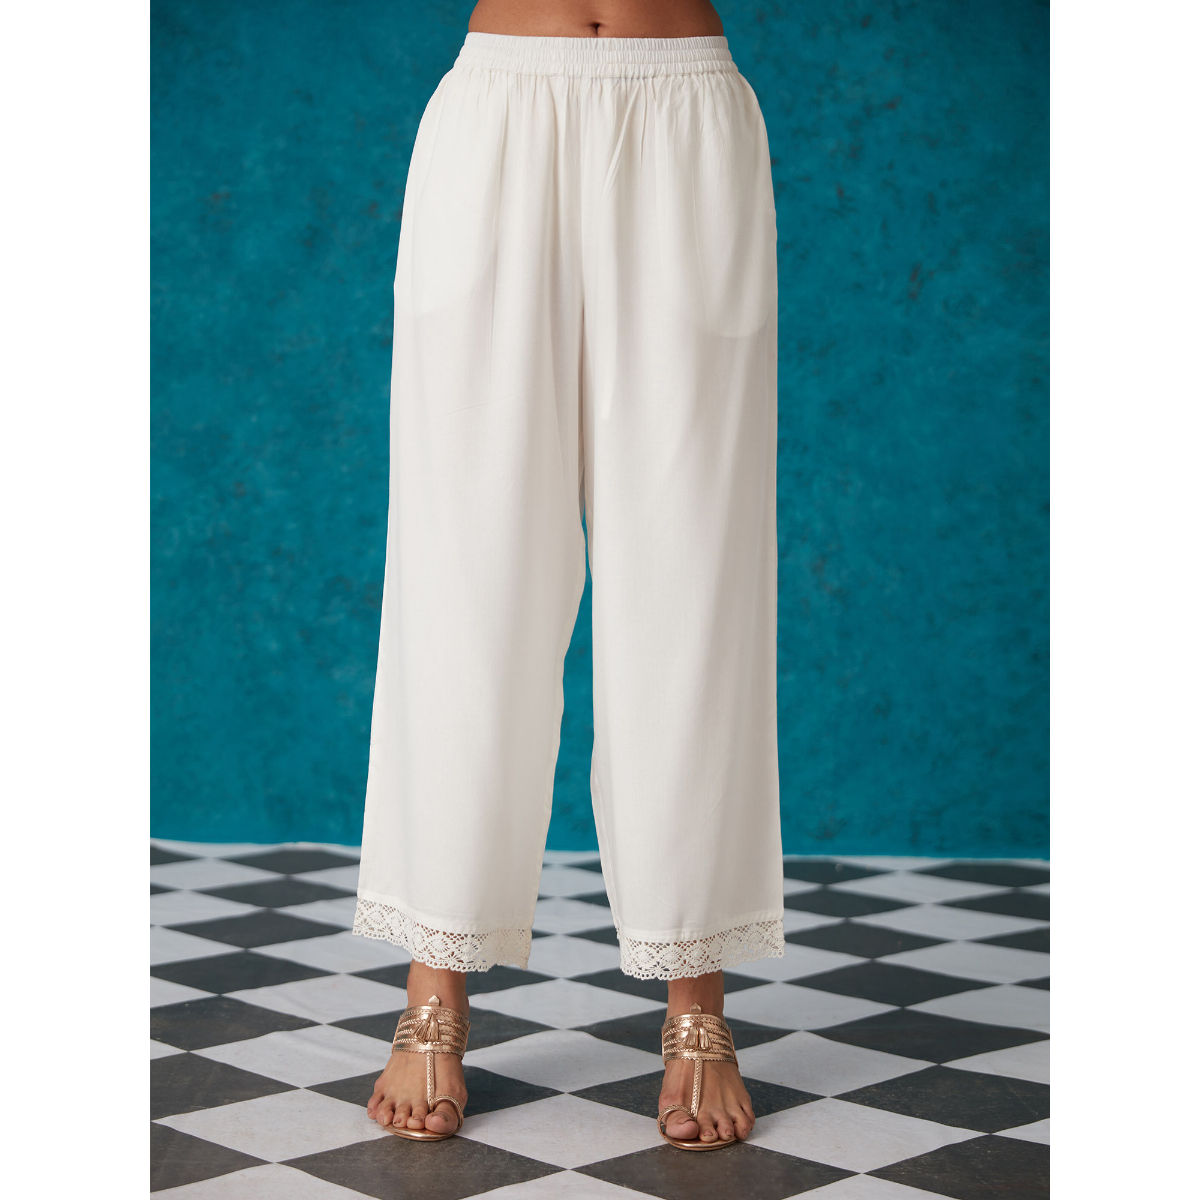 Buy Off-White Pants for Women by AVAASA MIX N' MATCH Online | Ajio.com